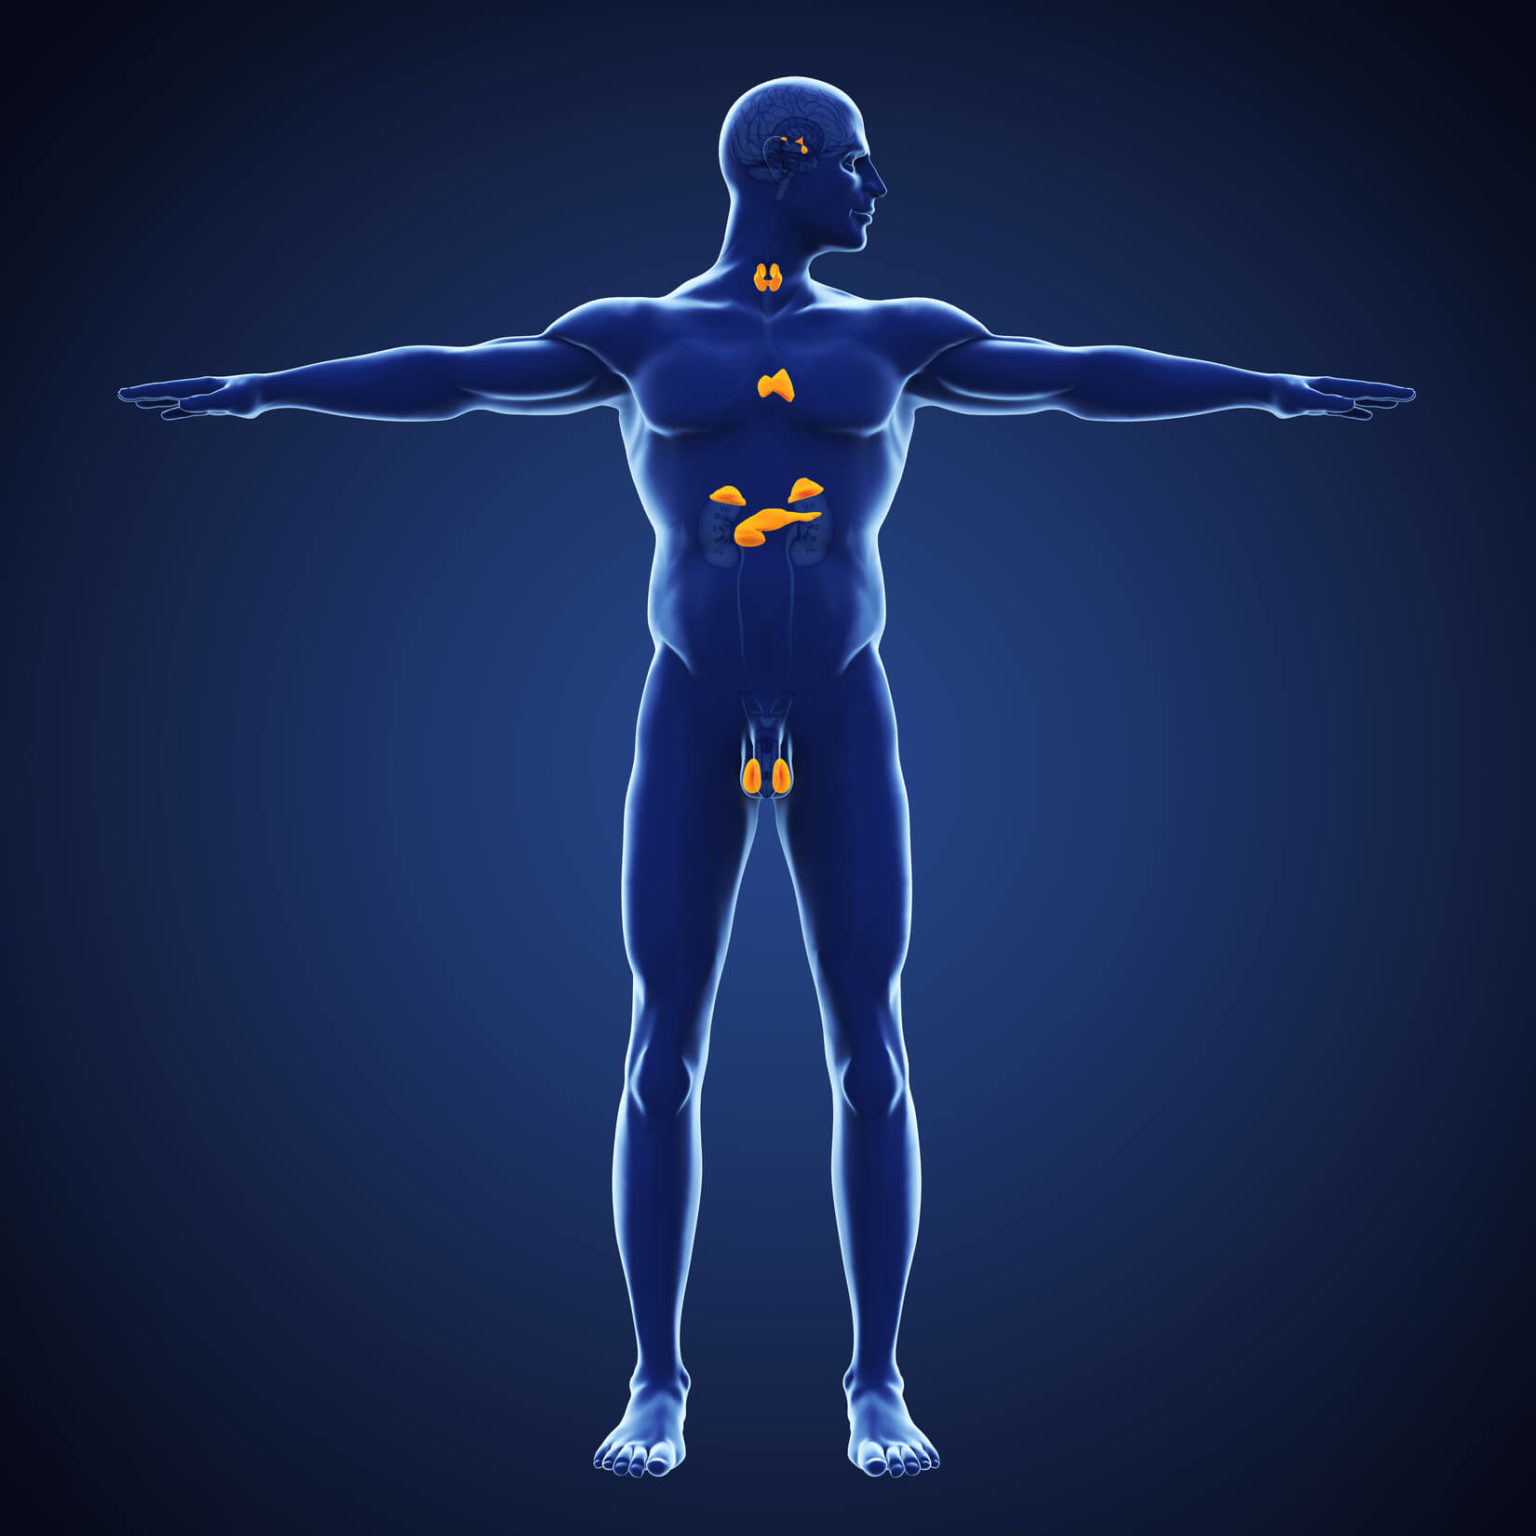 the-endocrine-system-and-balance-integrative-health-education